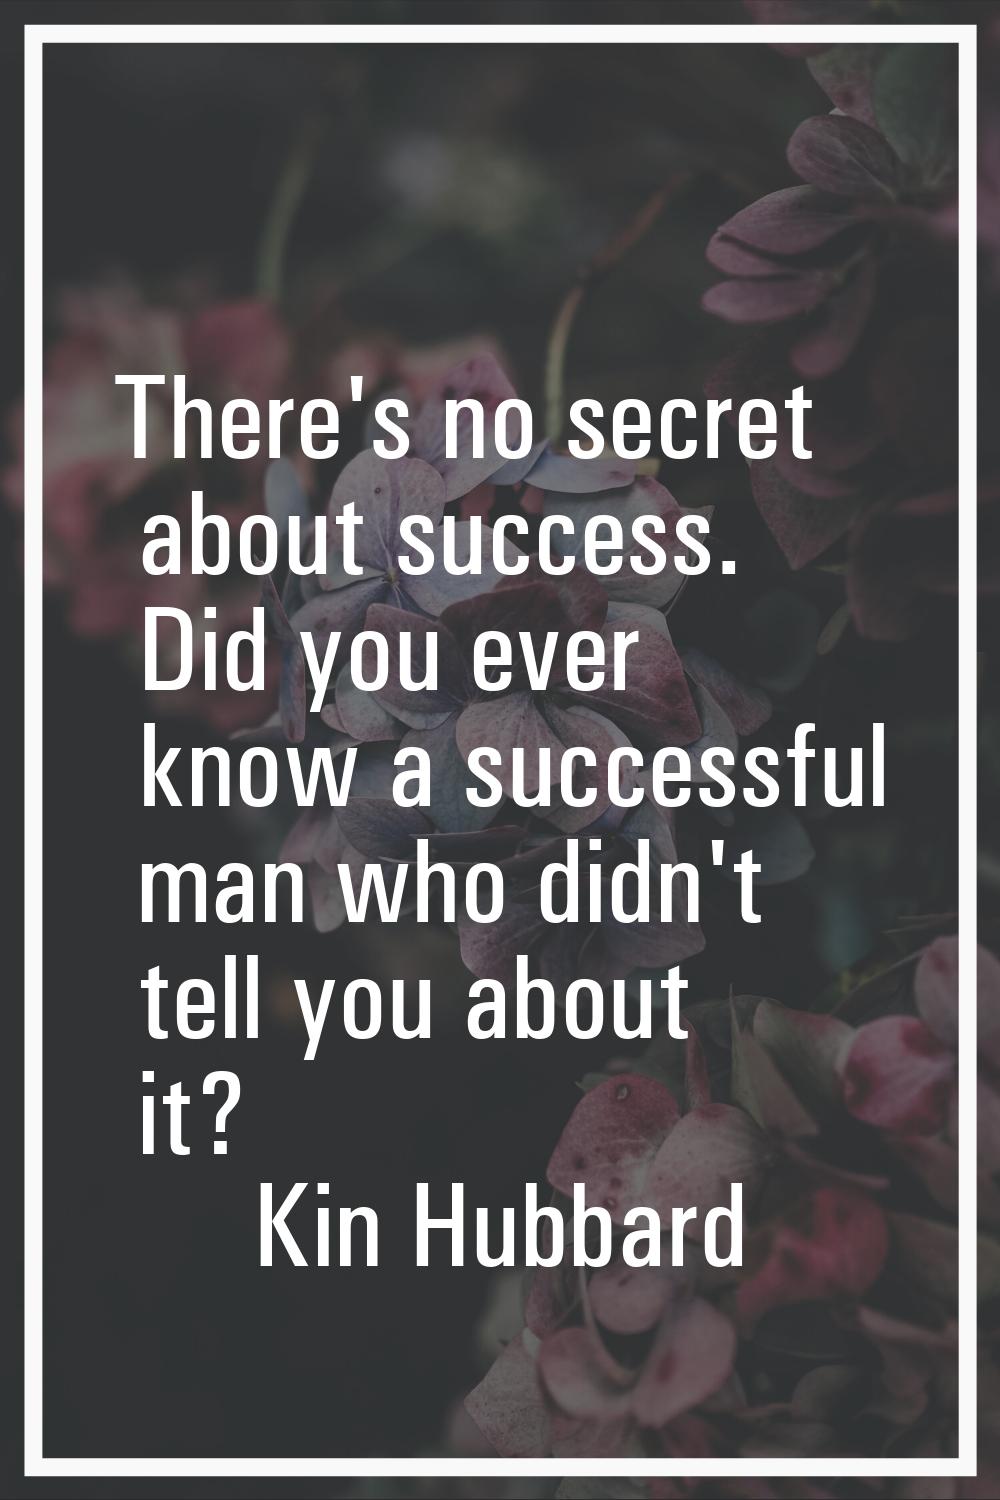 There's no secret about success. Did you ever know a successful man who didn't tell you about it?